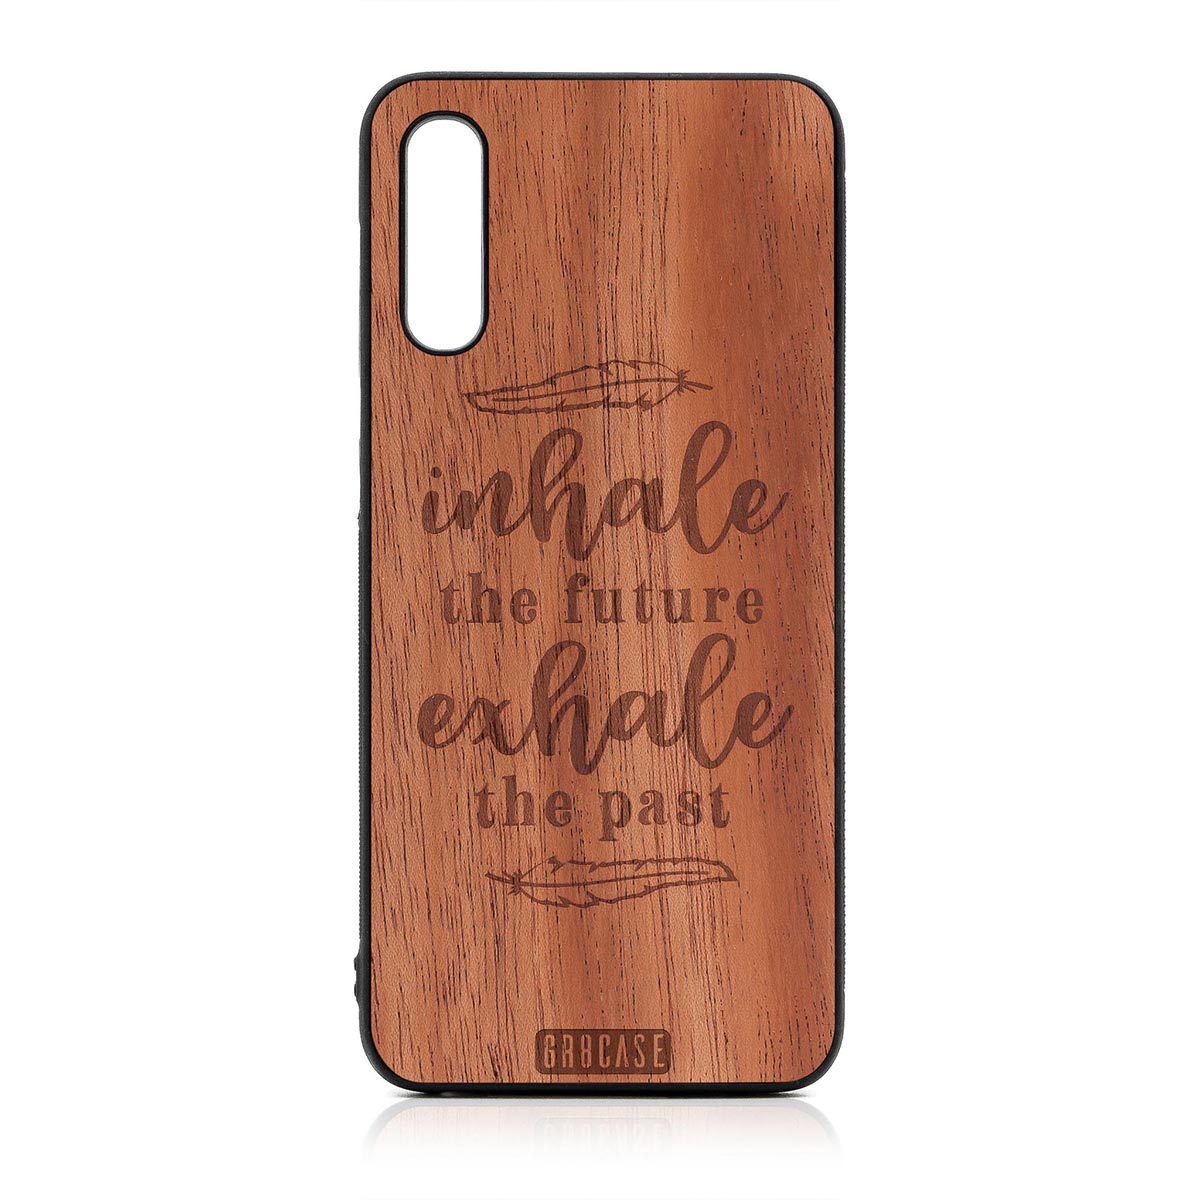 Inhale The Future Exhale The Past Design Wood Case For Samsung Galaxy A50 by GR8CASE